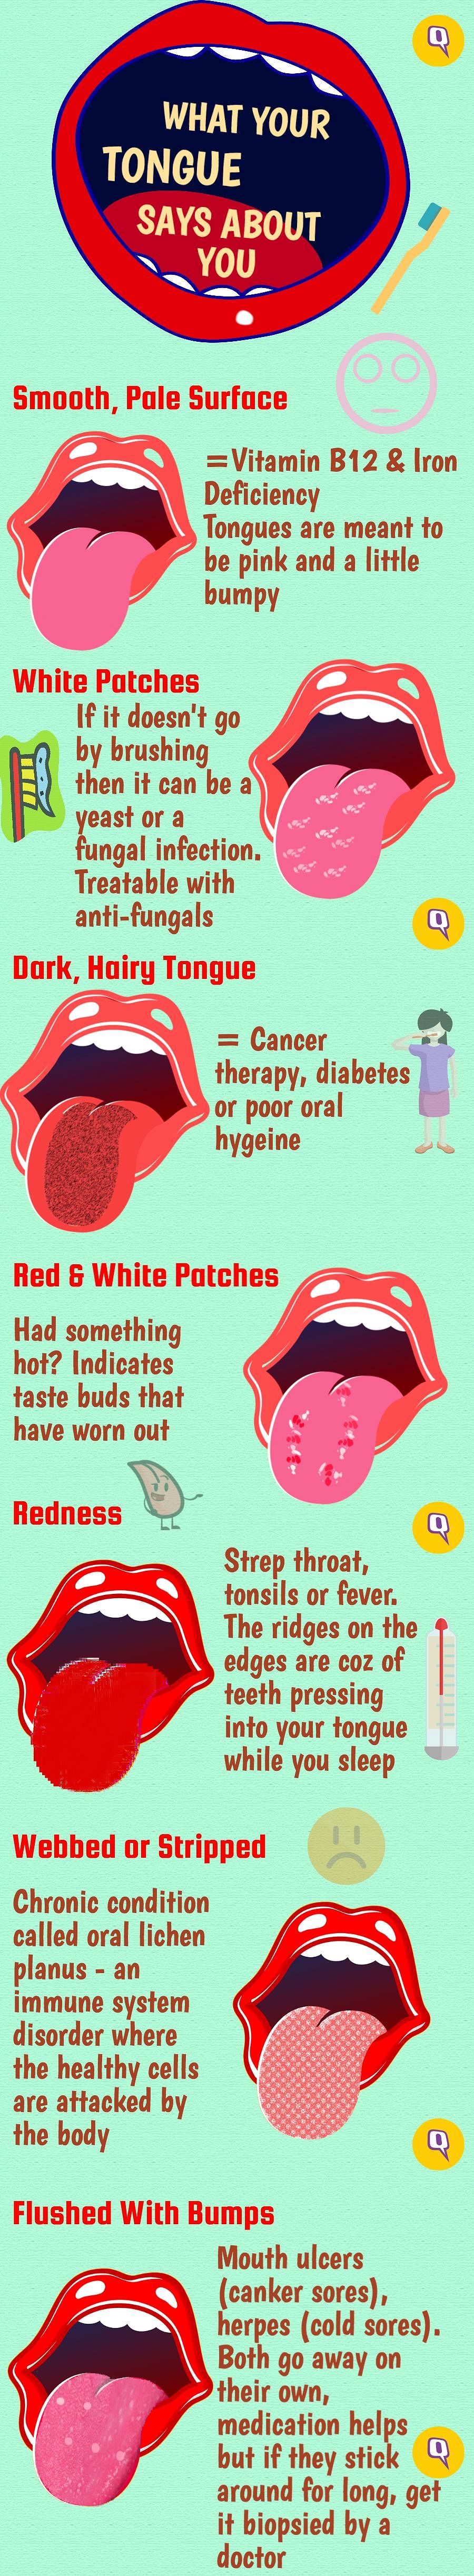 Is your tongue sending signs about your health? You can learn a lot by opening your mouth